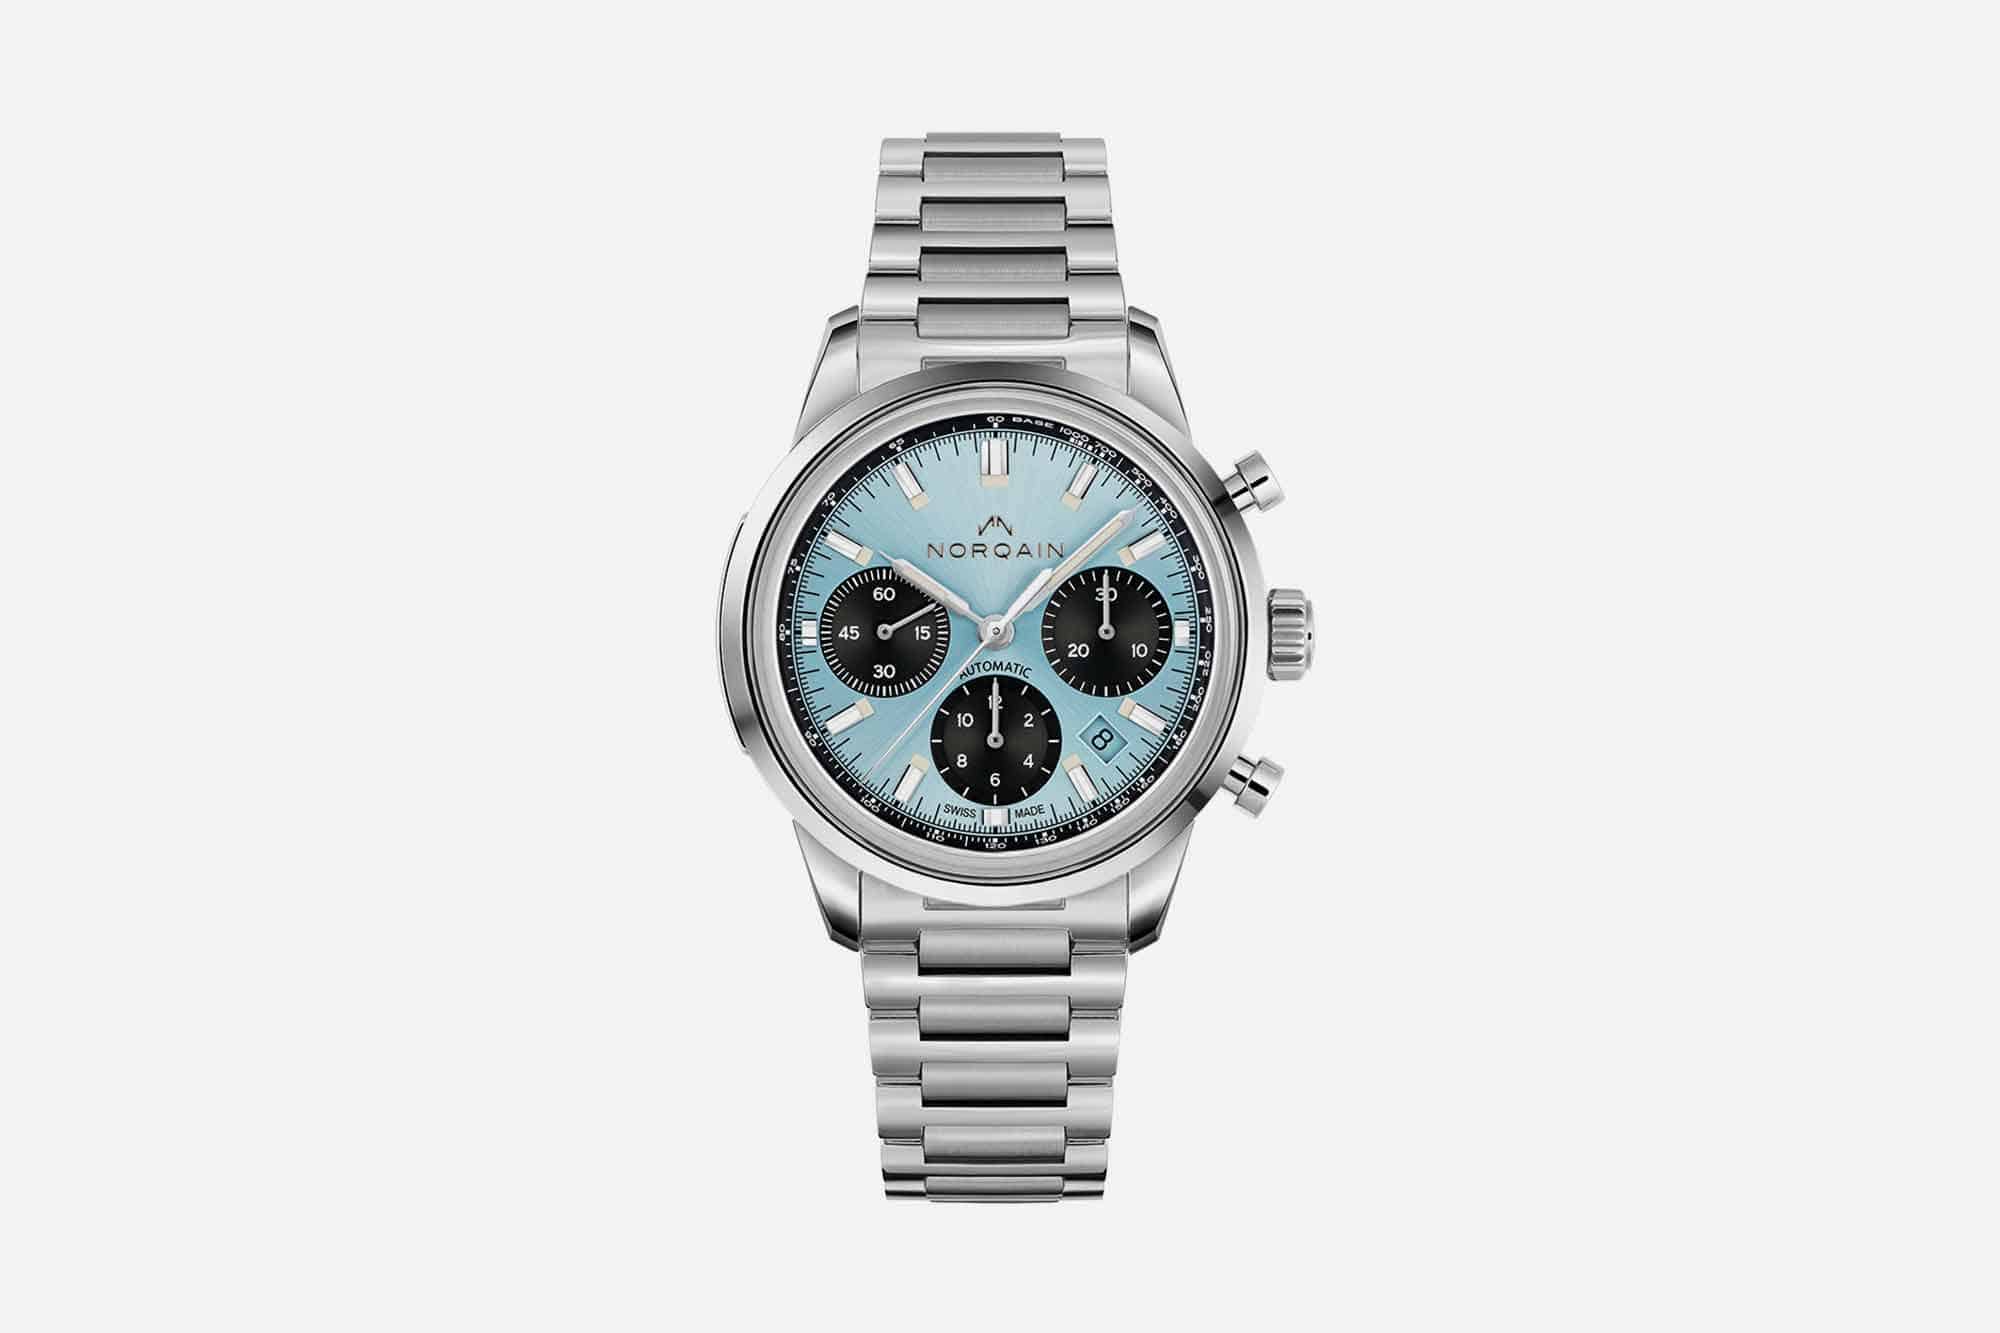 Norqain Adds a Limited Edition Freedom 60 Chrono in Ice Blue to their Lineup